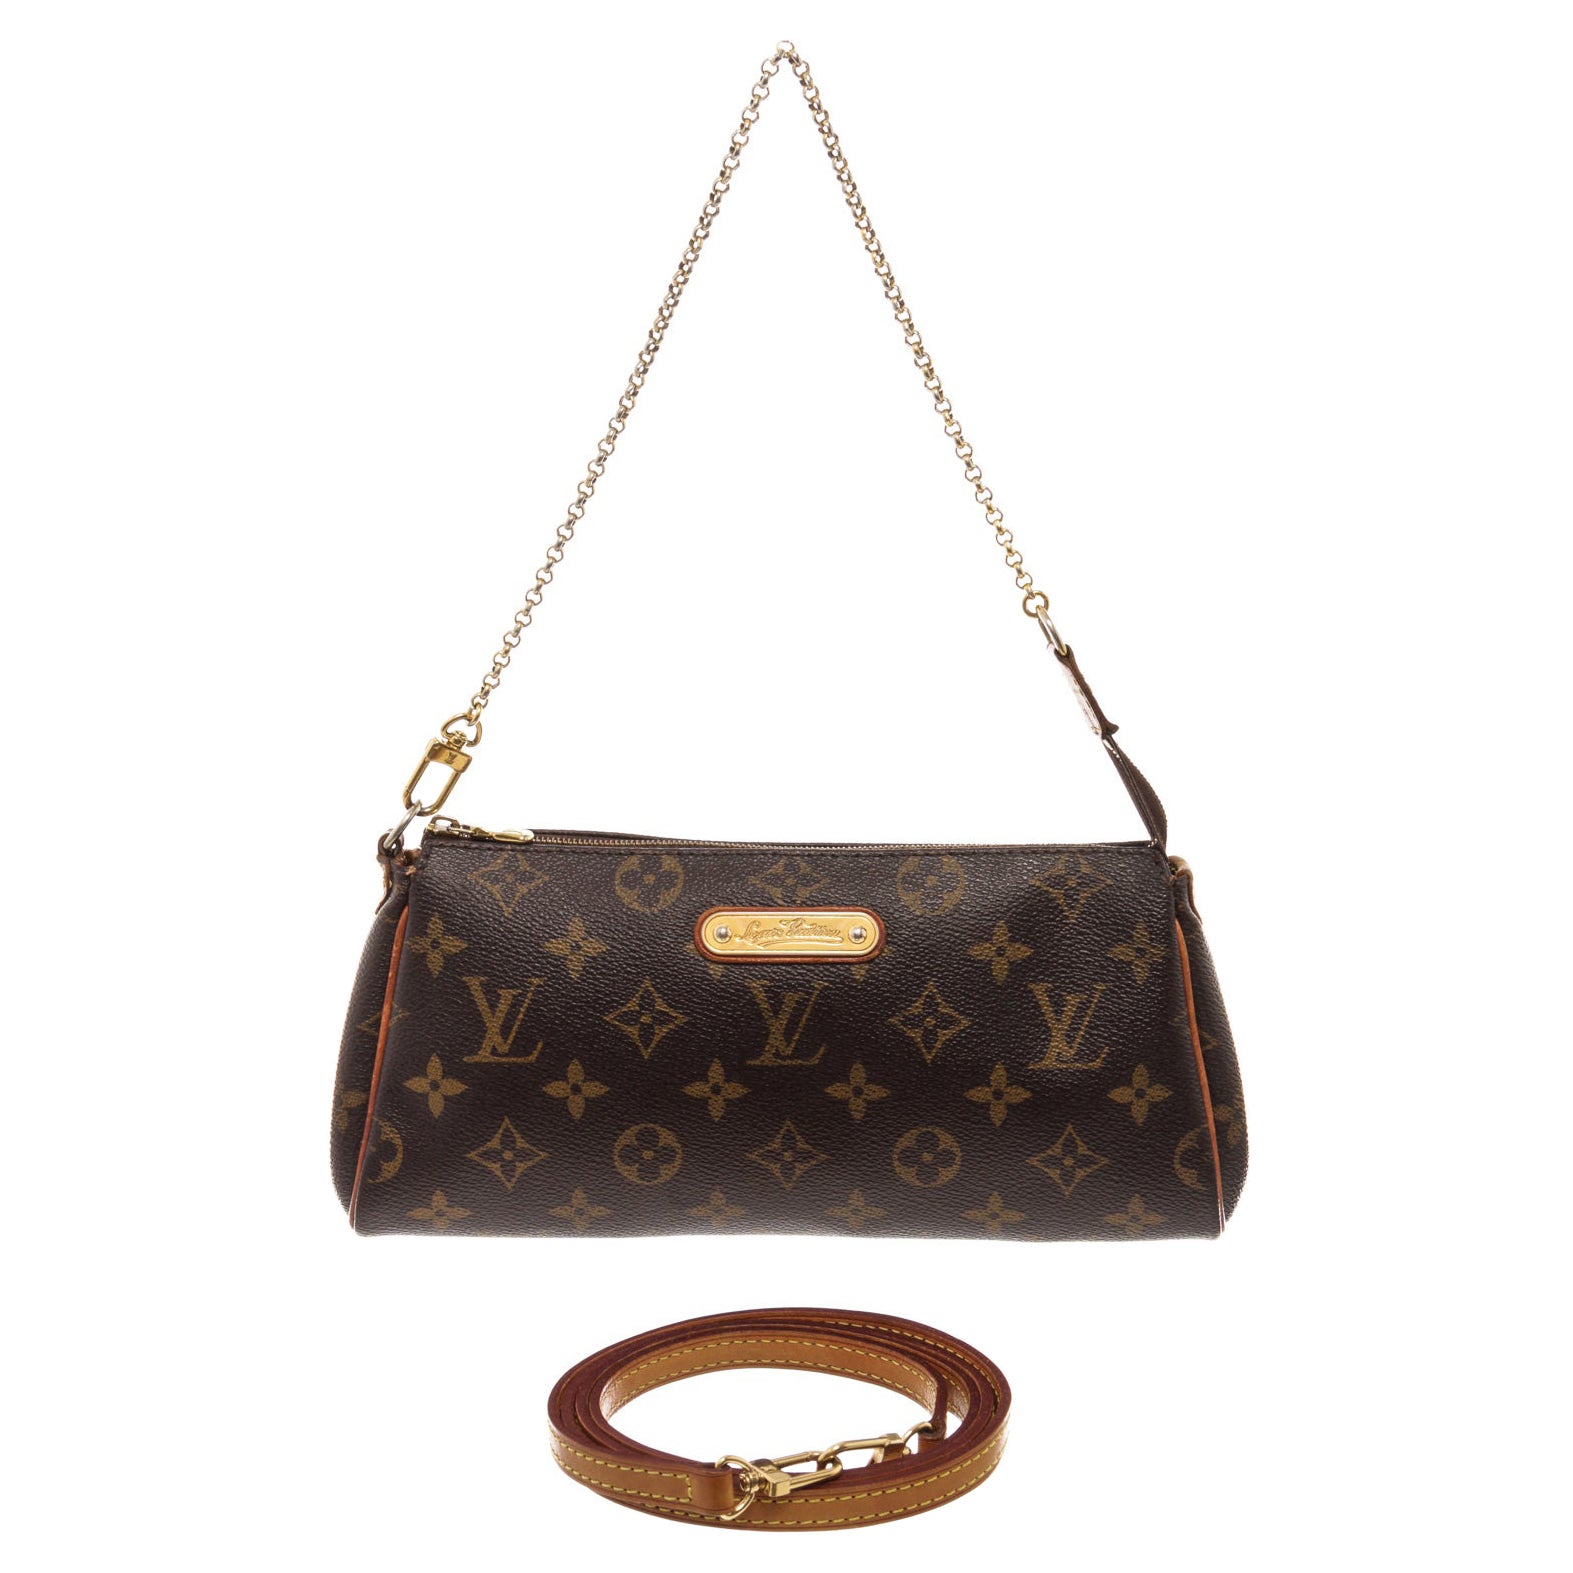 New Louis Vuitton Bags - 303 For Sale on 1stDibs  louis vuitton new handbag,  new louis vuitton purses, newest louis vuitton purses